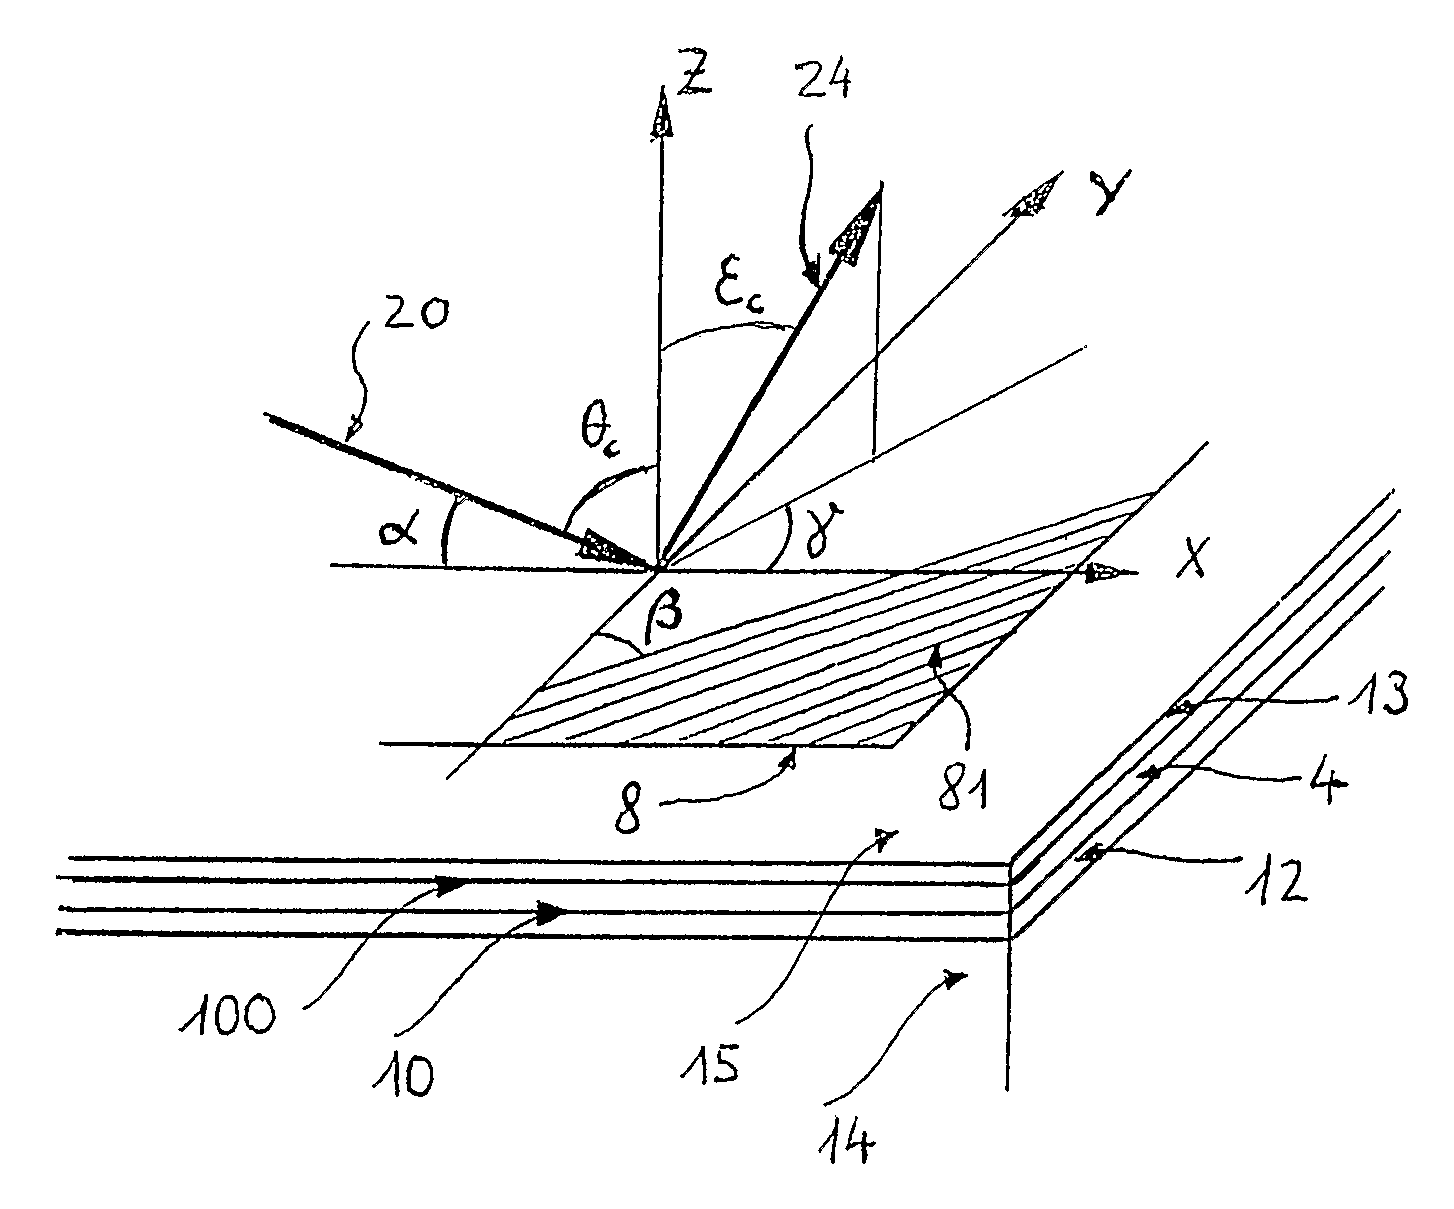 High efficiency optical diffraction device